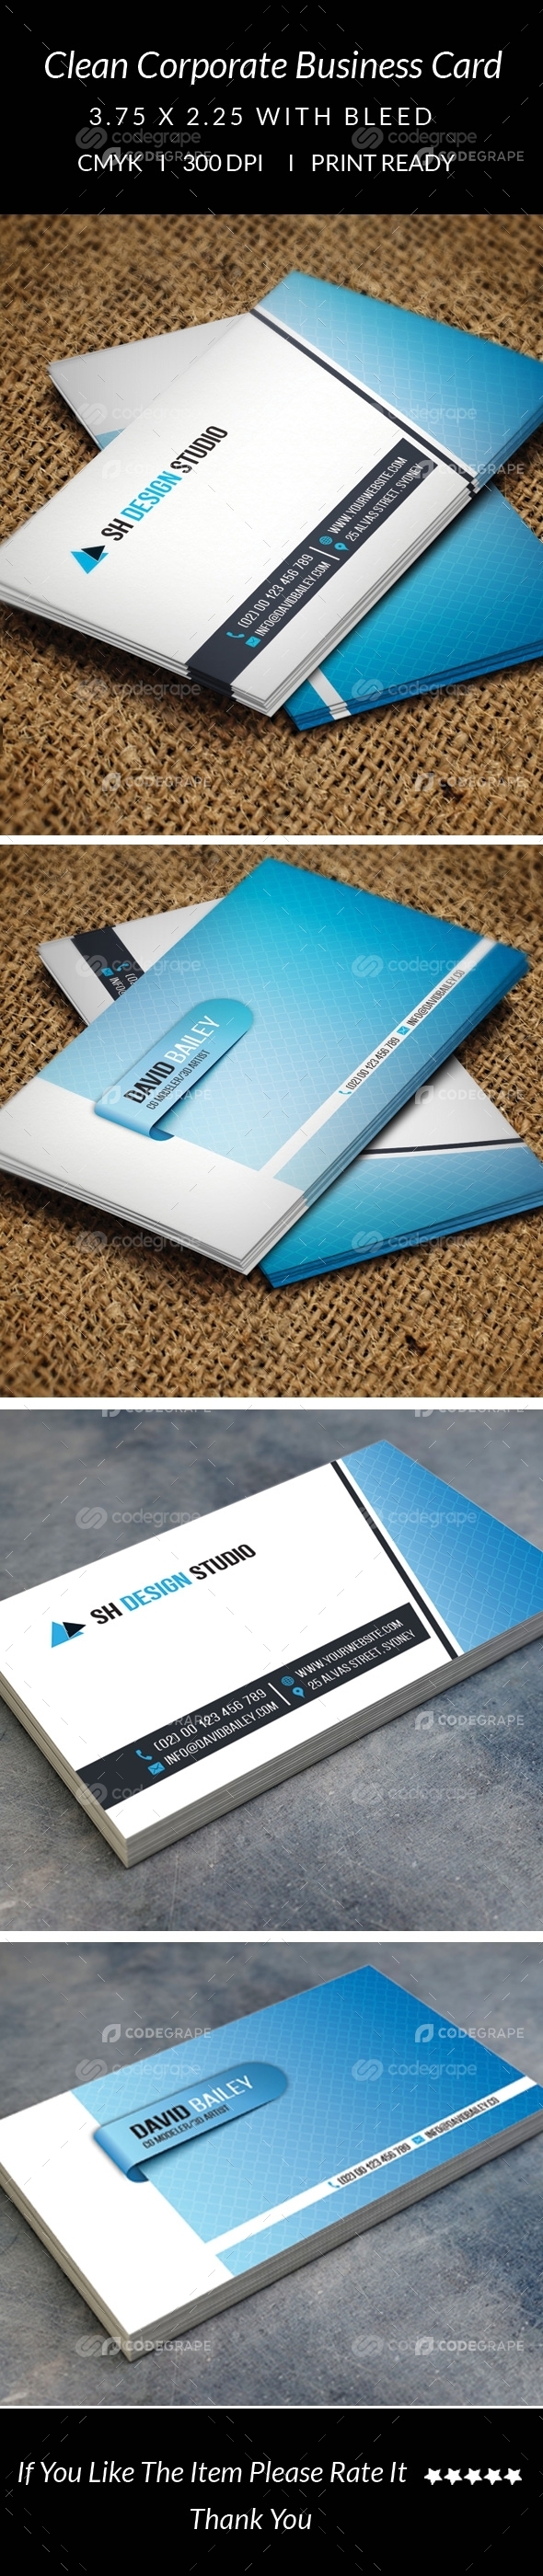 Clean Corporate Business Card v1